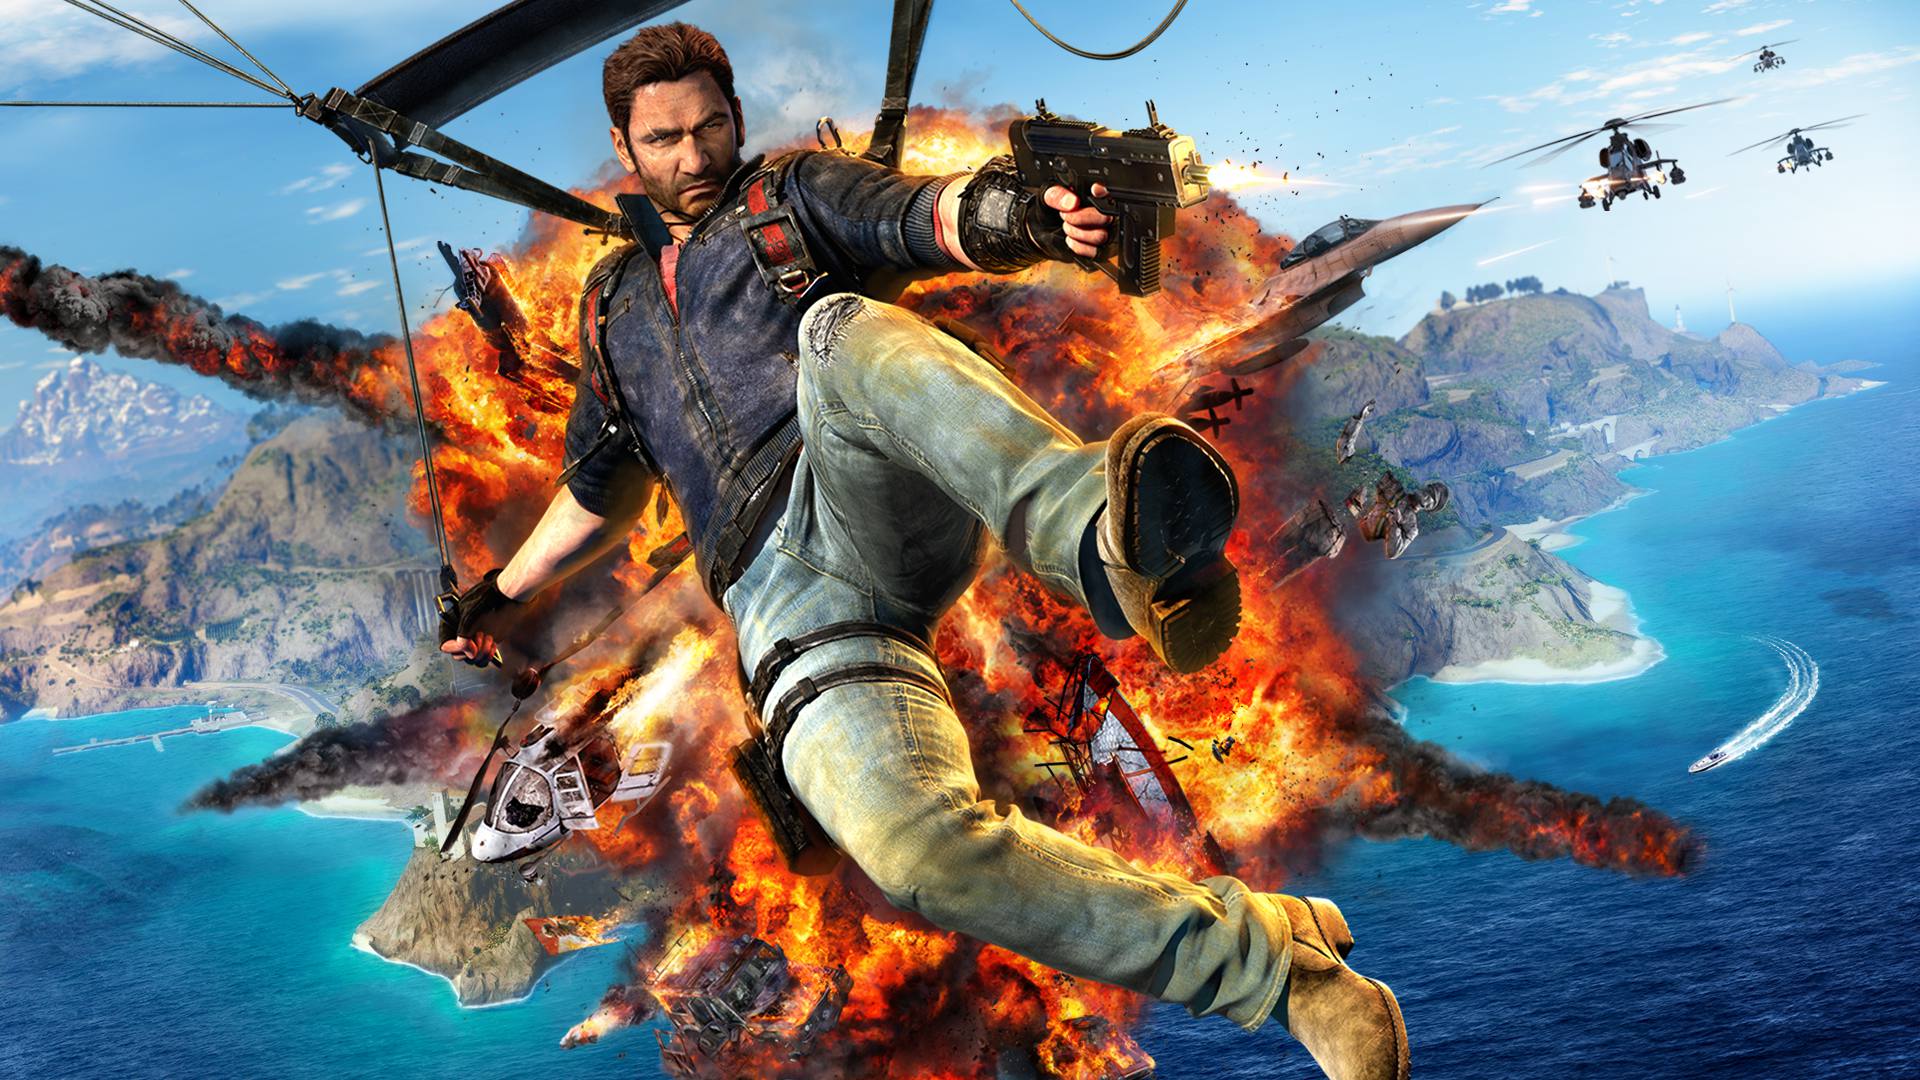 General 1920x1080 Just Cause 3 video games explosion Rico Rodriguez video game characters